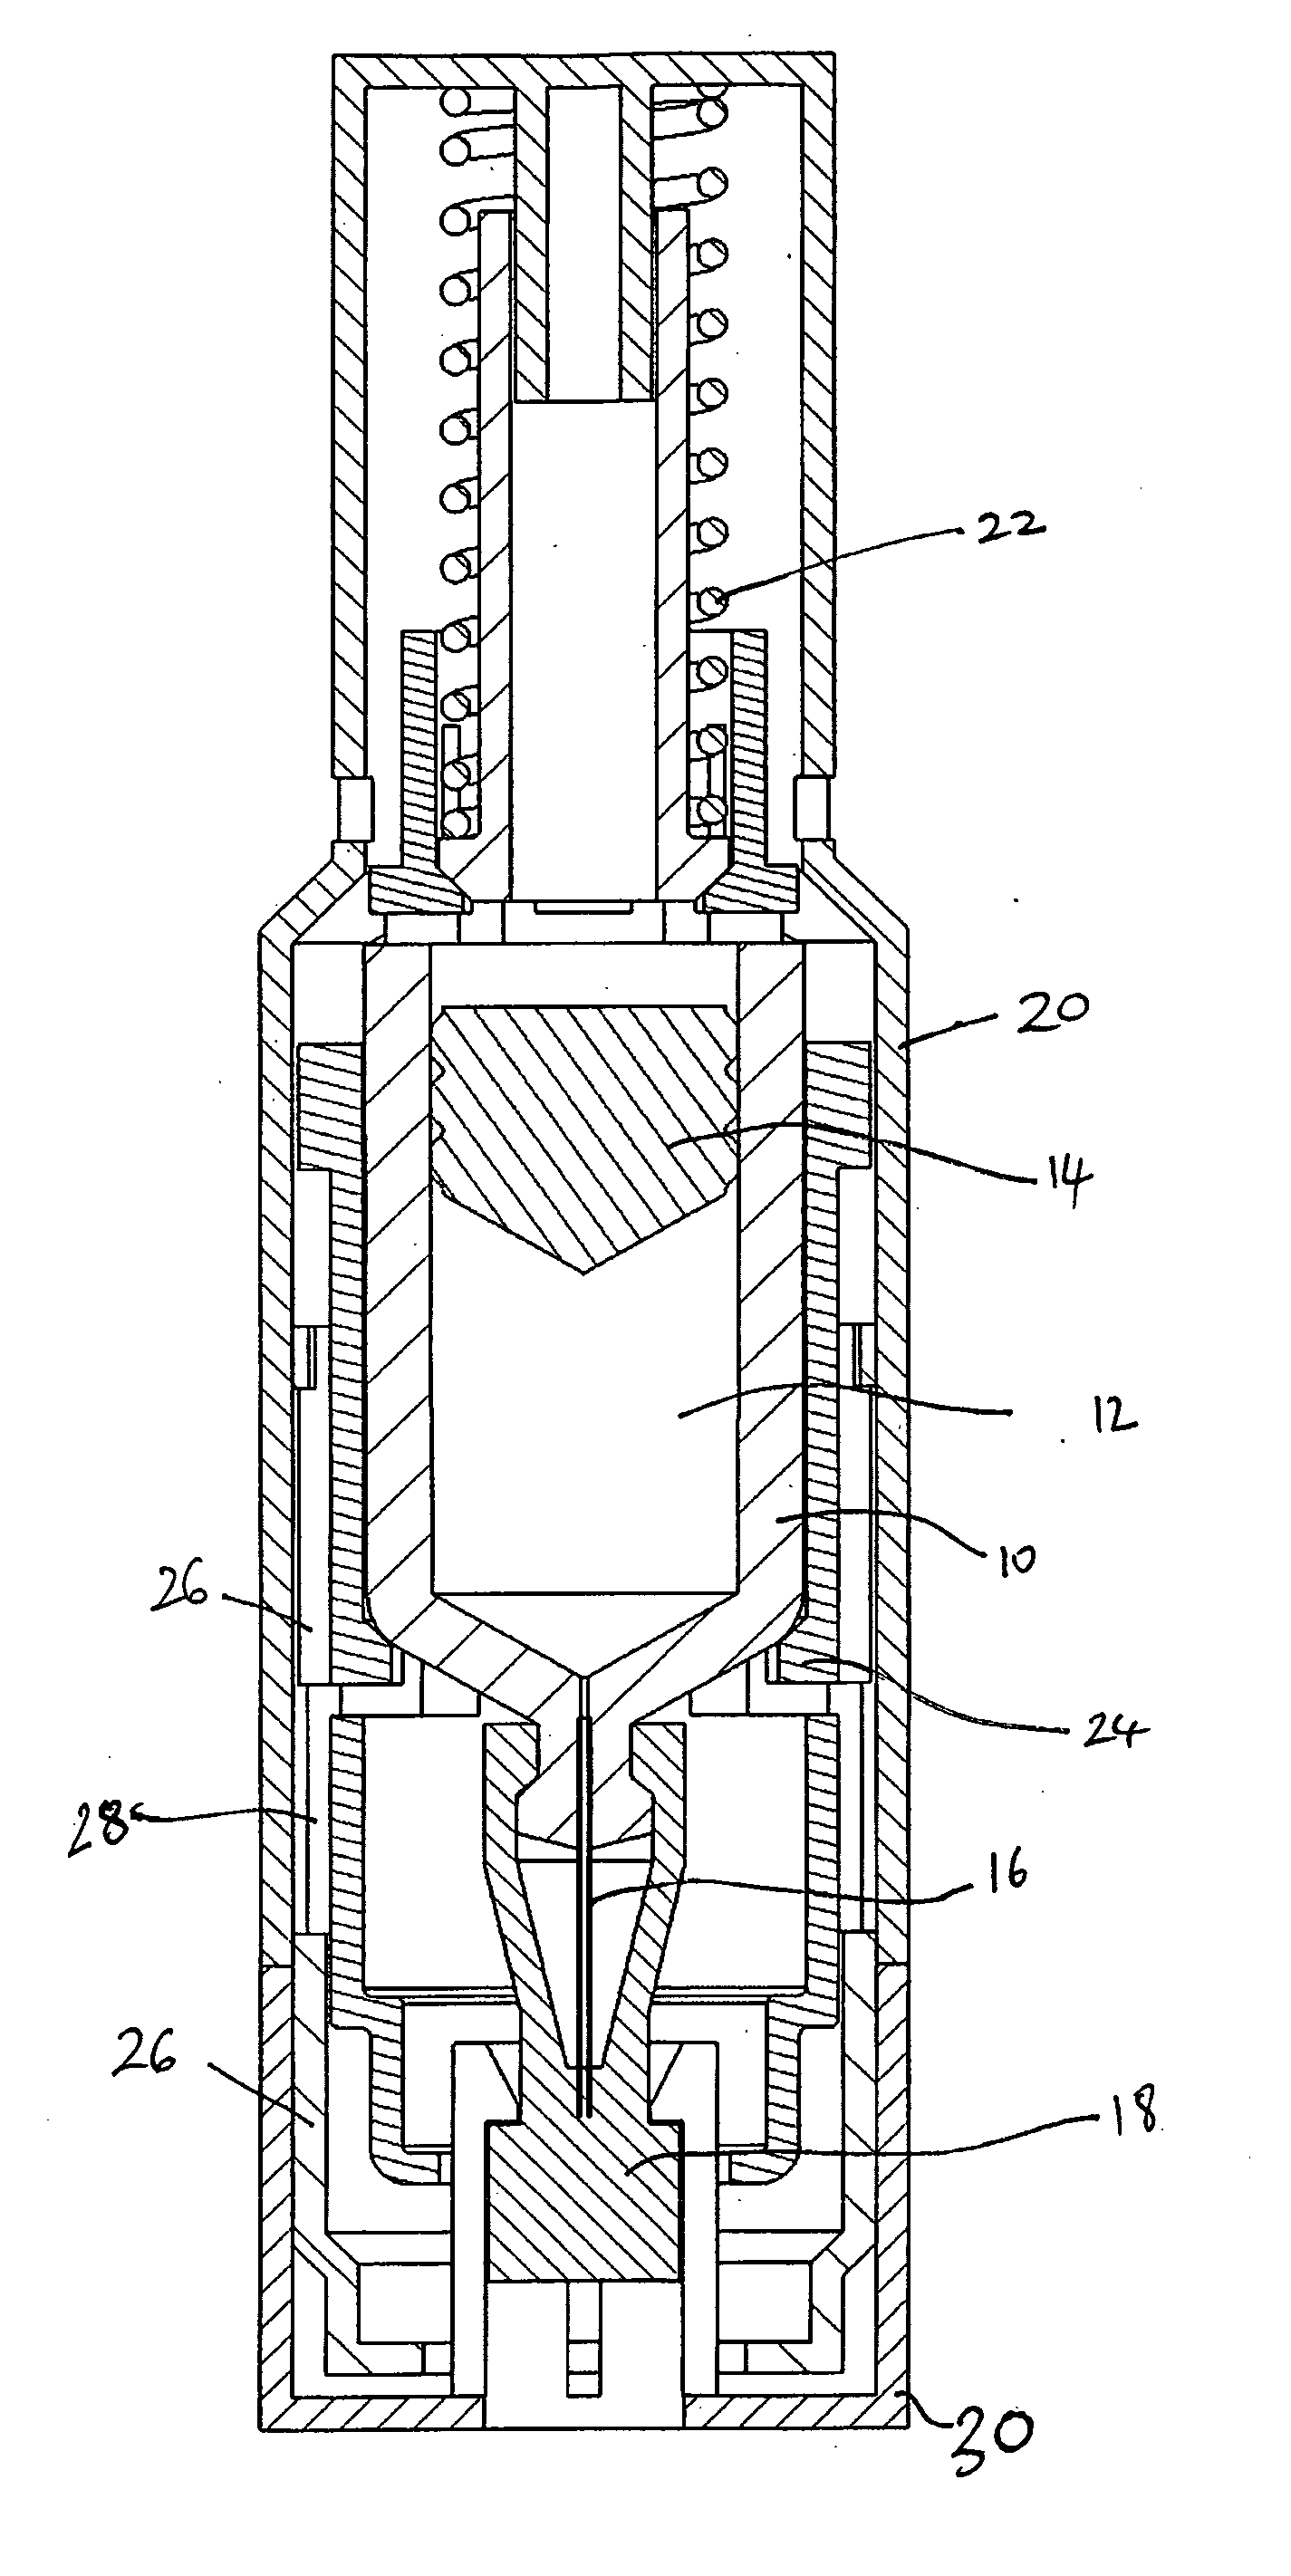 Drive assembly for an autoinjector and a method of assembling an autoinjector